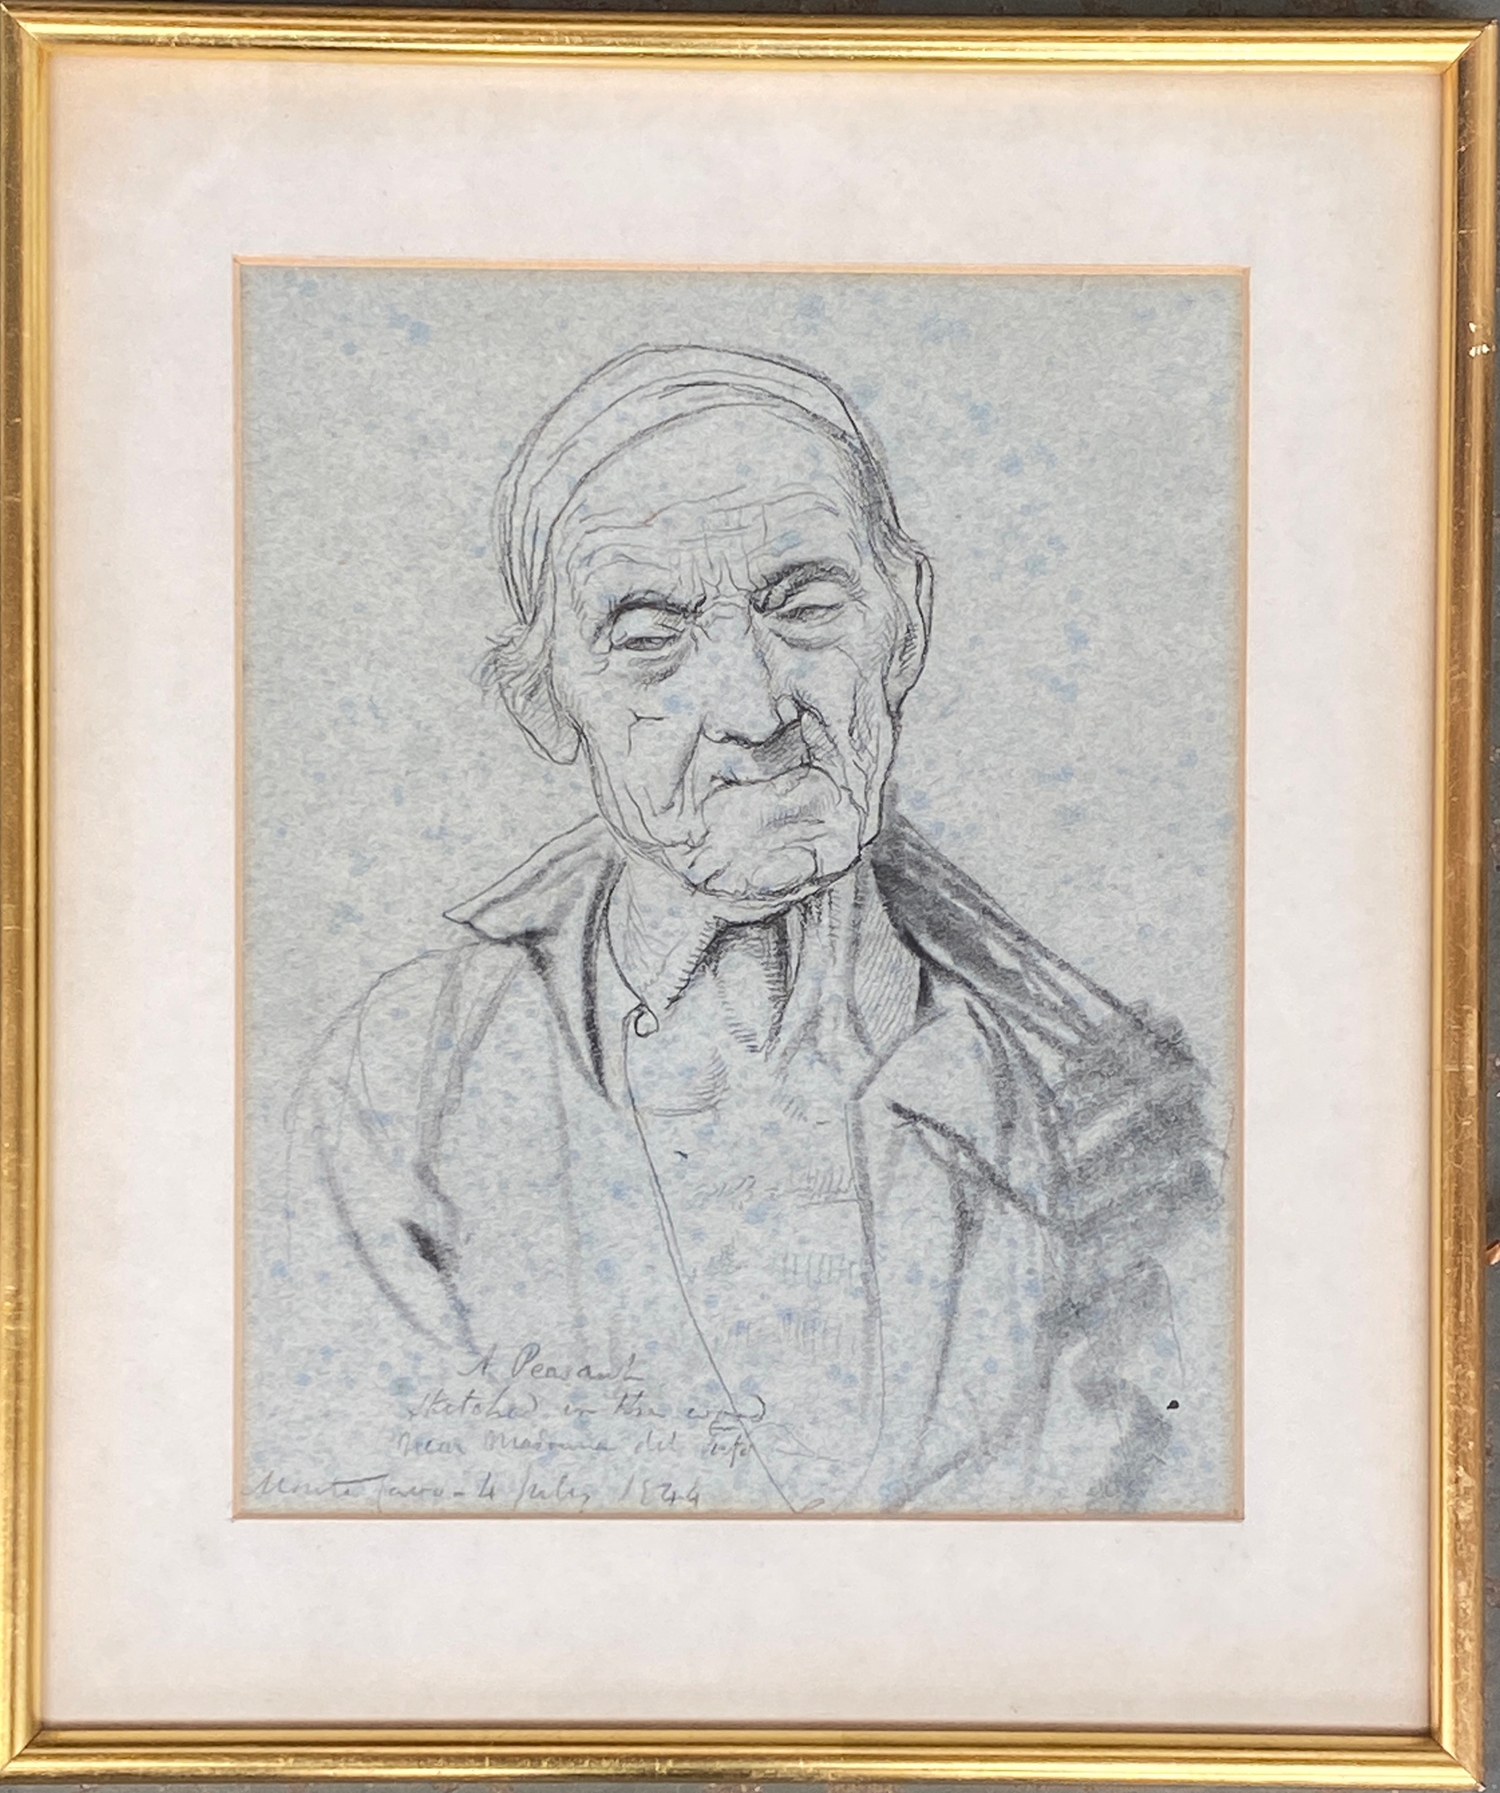 19th century pencil study, 'A Peasant Sketched in a Wood', inscribed lower left, dated 1844, 23x19cm - Image 2 of 2